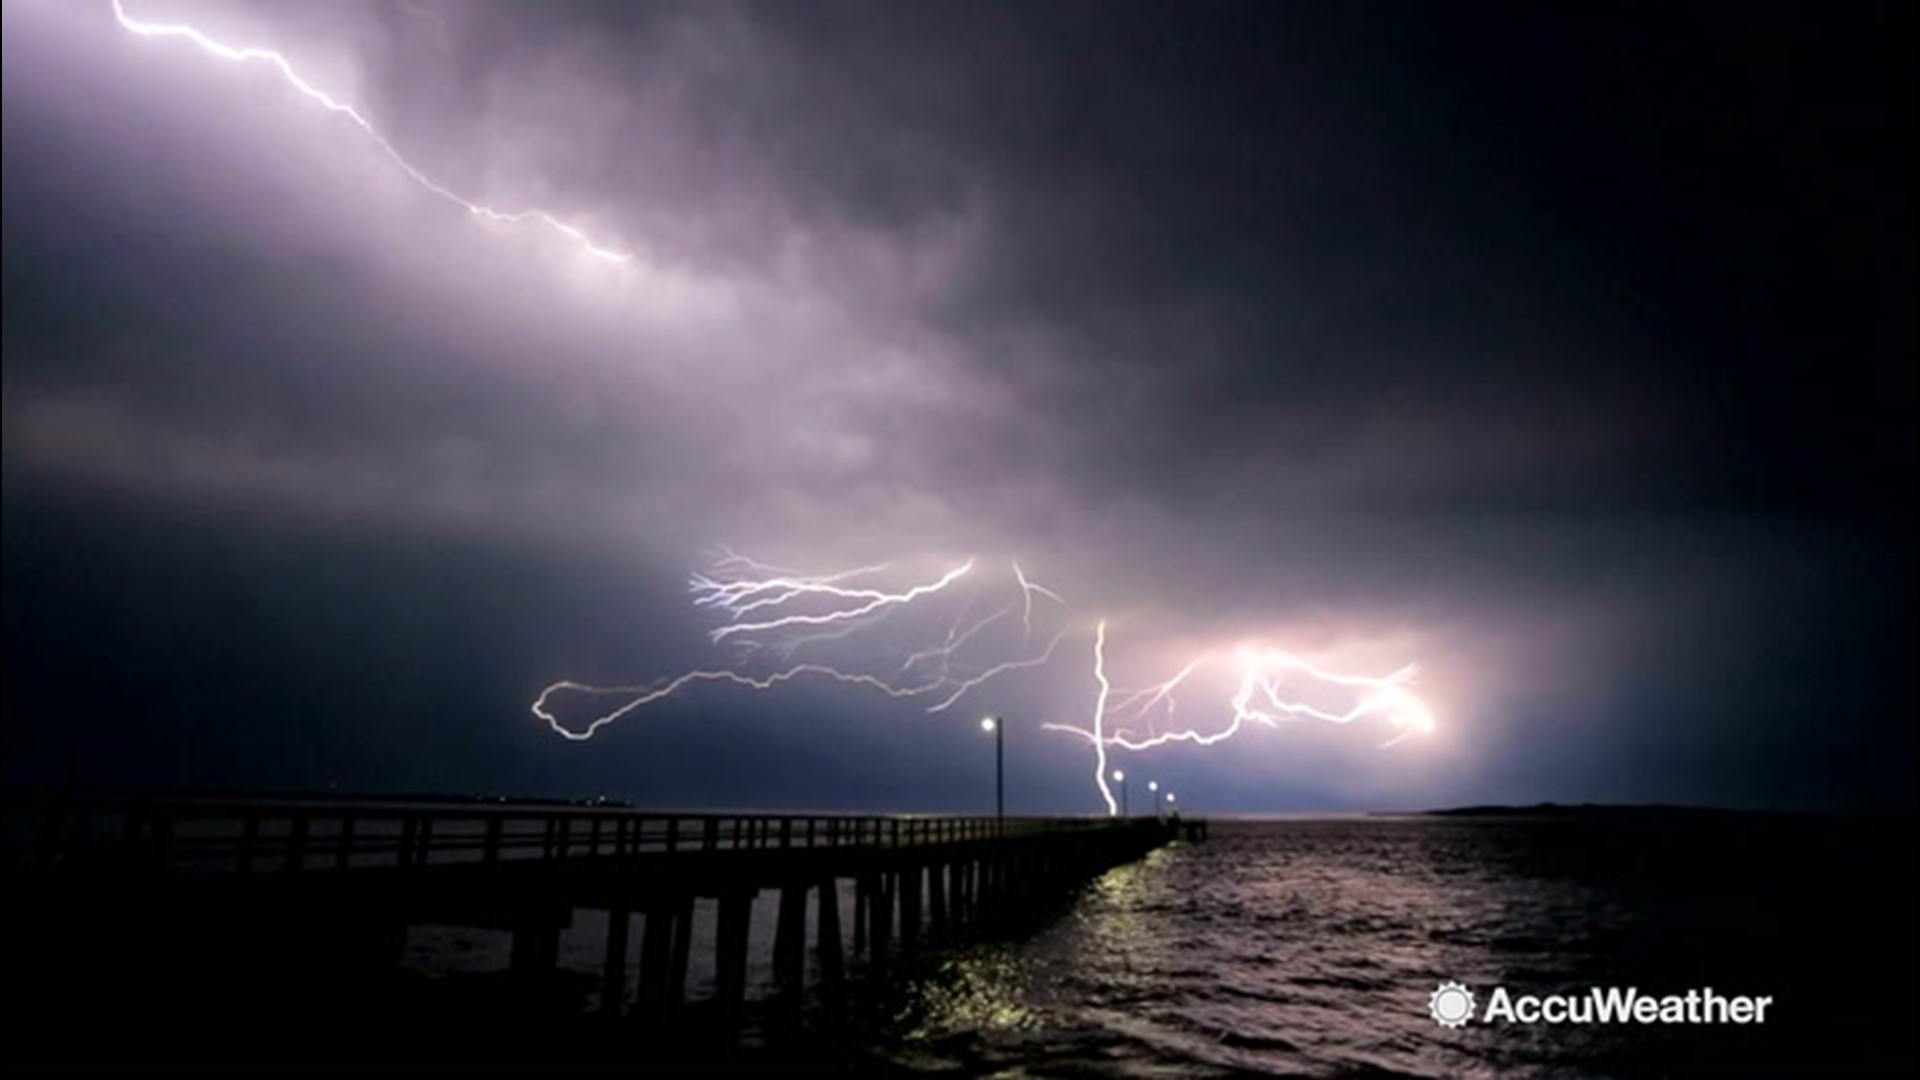 Ghosts and other types of paranormal activity have more in common with weather than you may think. Paranormal investigator, Mark Keyes, explains the role thunderstorms play in ghostly activities.